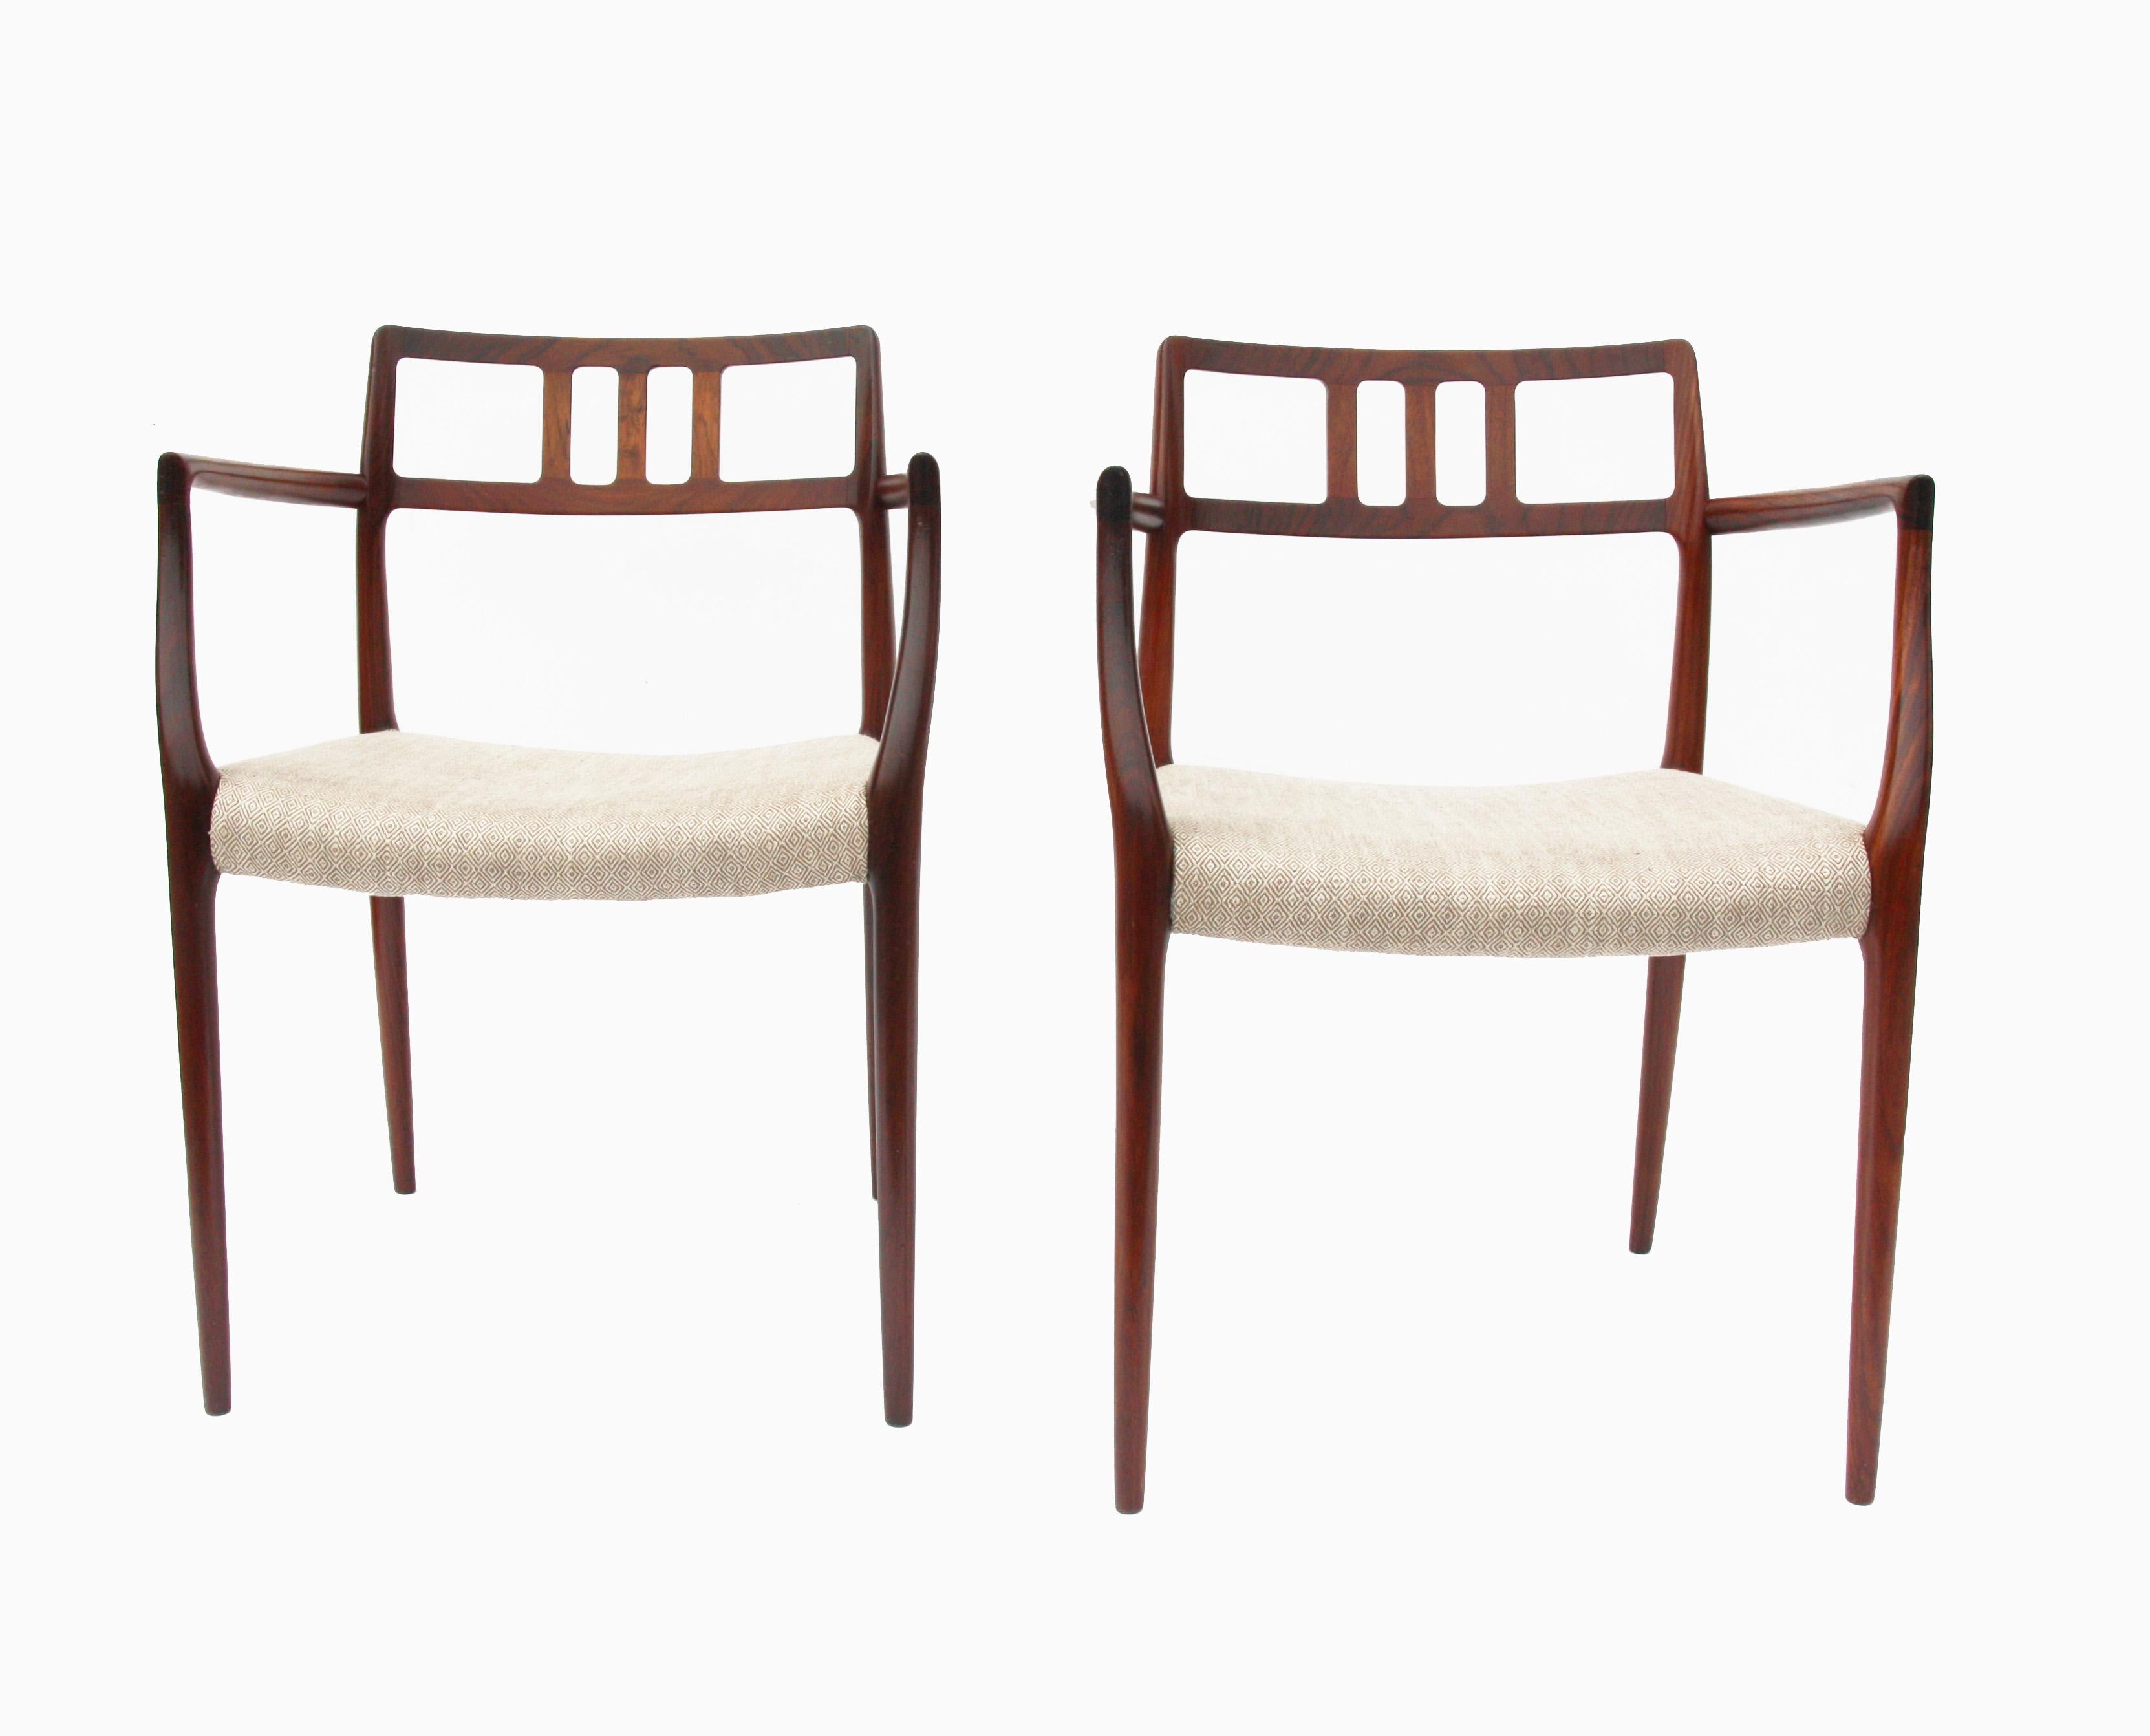 Vintage set of six dining chairs designed by Niels O. Møller. Stamped under each seat. The set includes two captain armchairs and four side chairs.